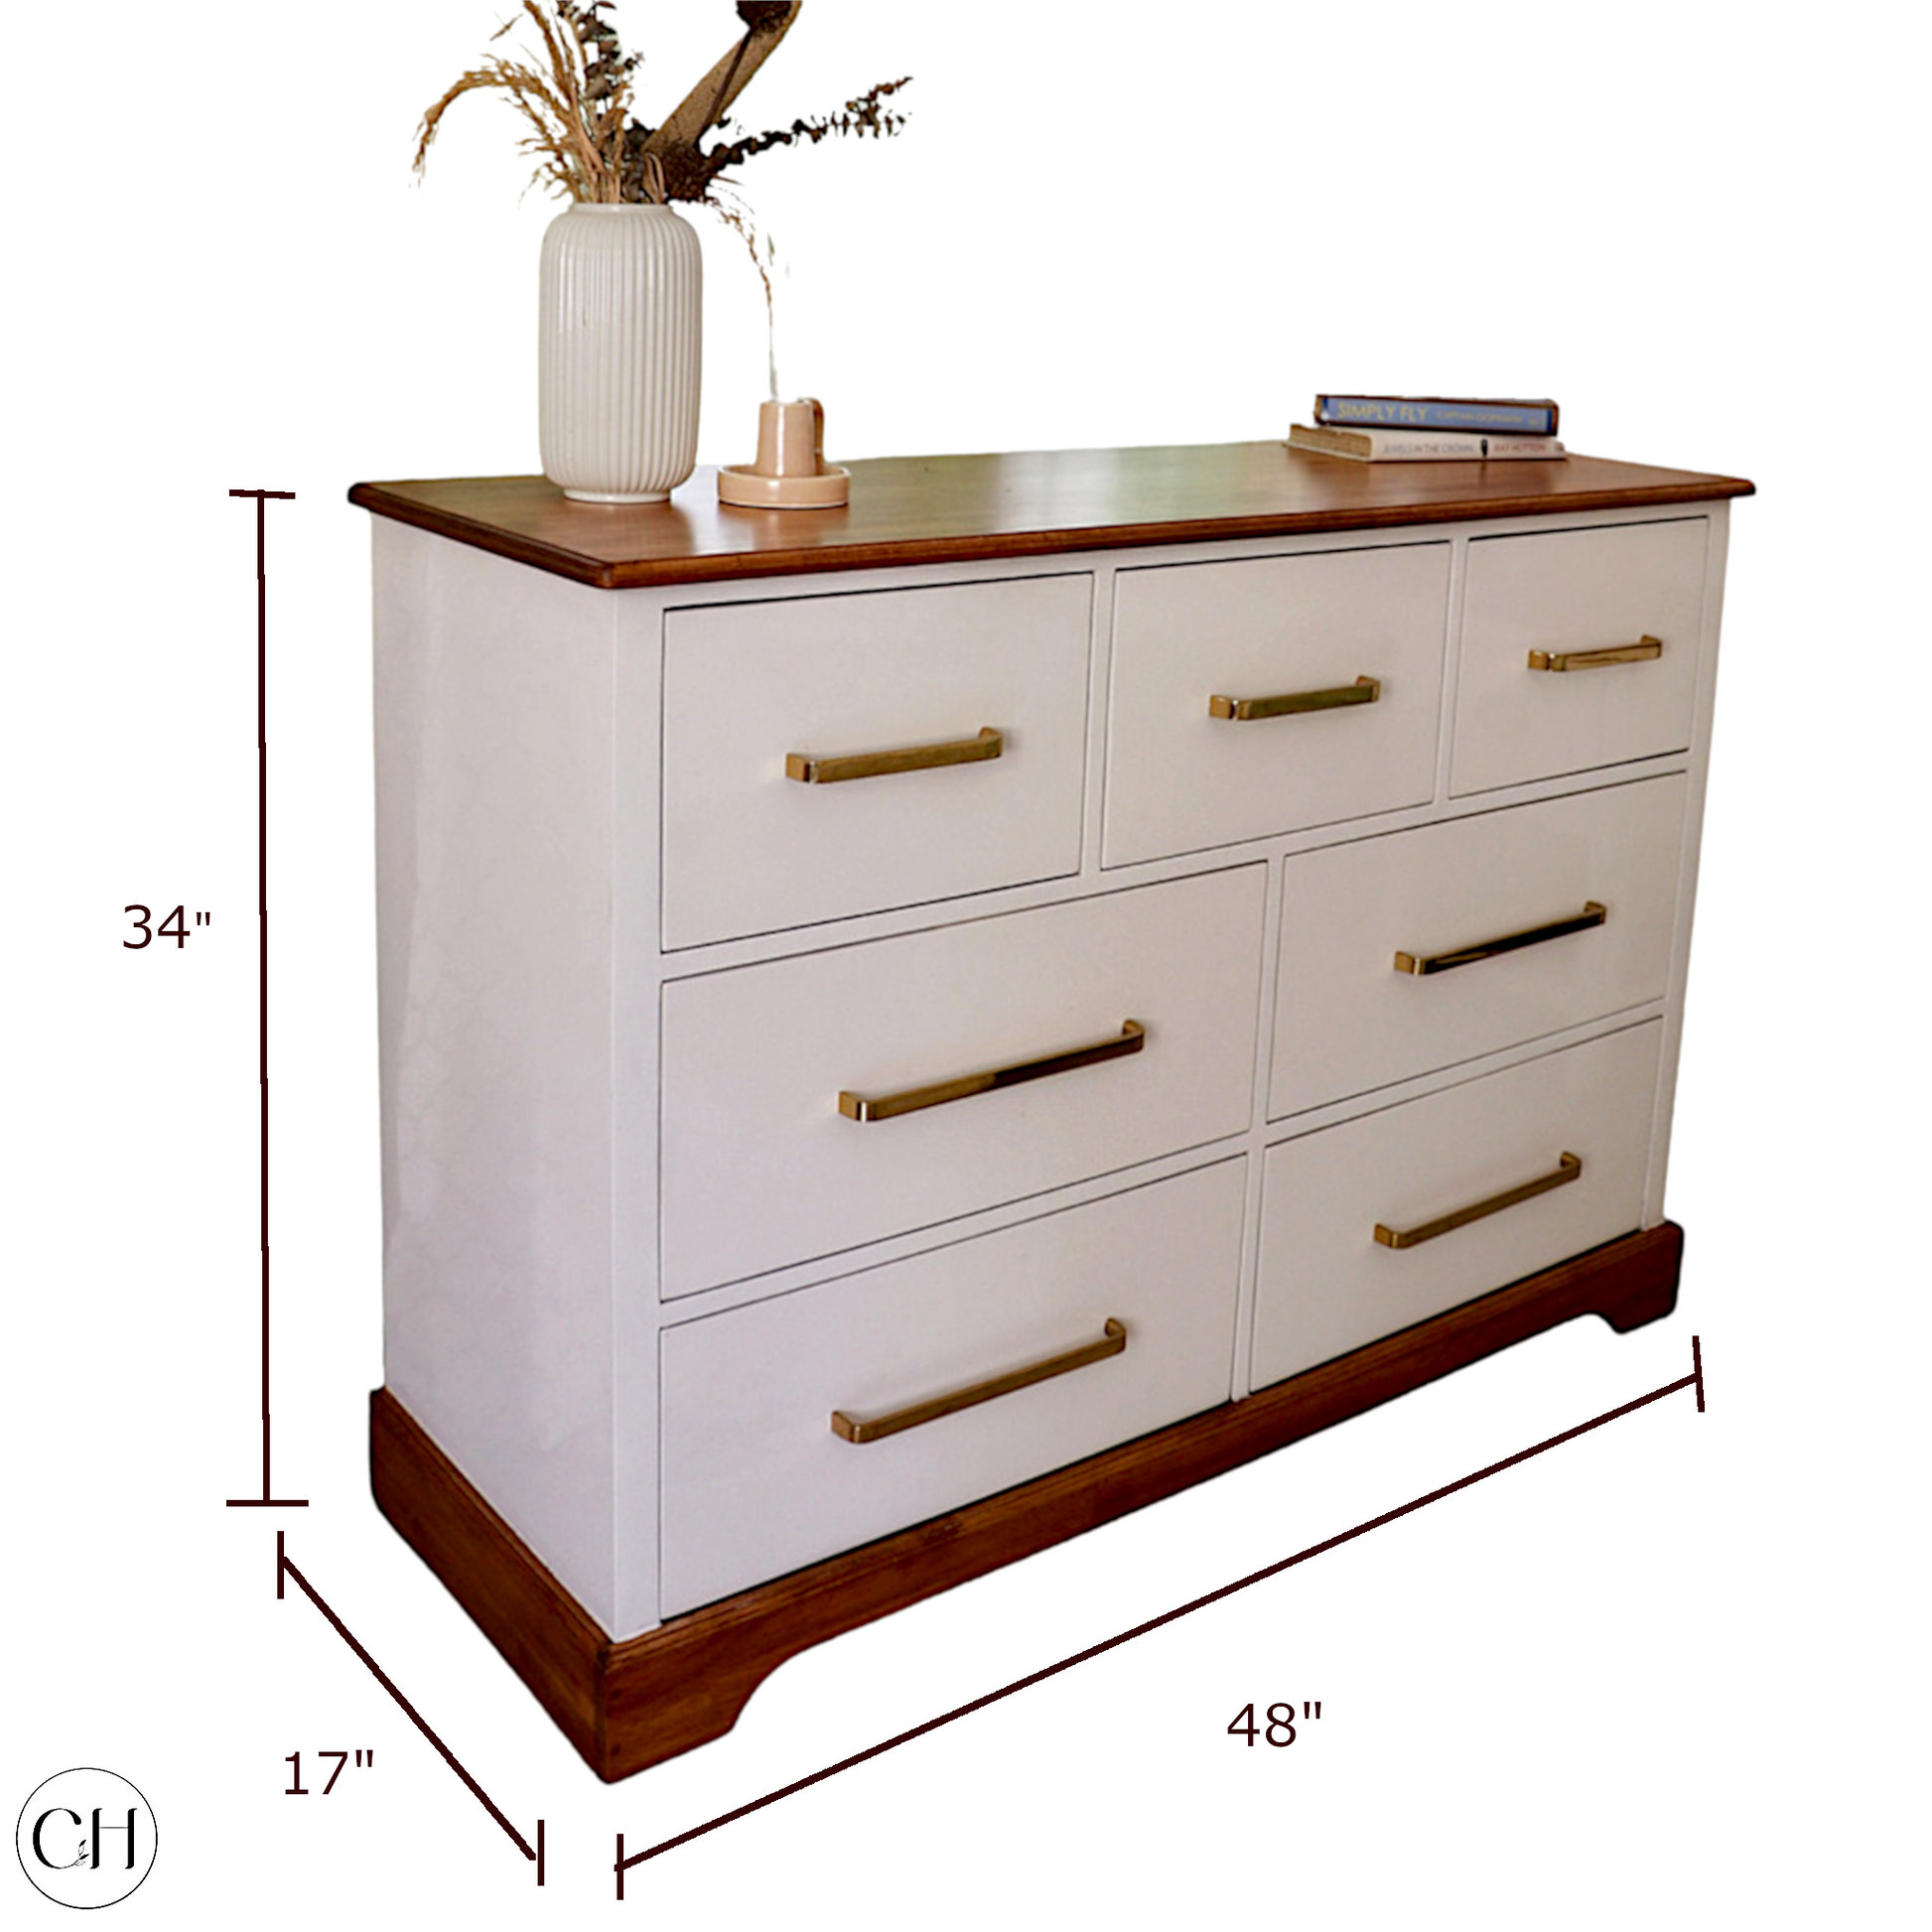 CustHum-Wisteria - rustic-modern chest of drawers in two-tone white-and-wood finish, brass-coated handles (dimensions 48x17x34)